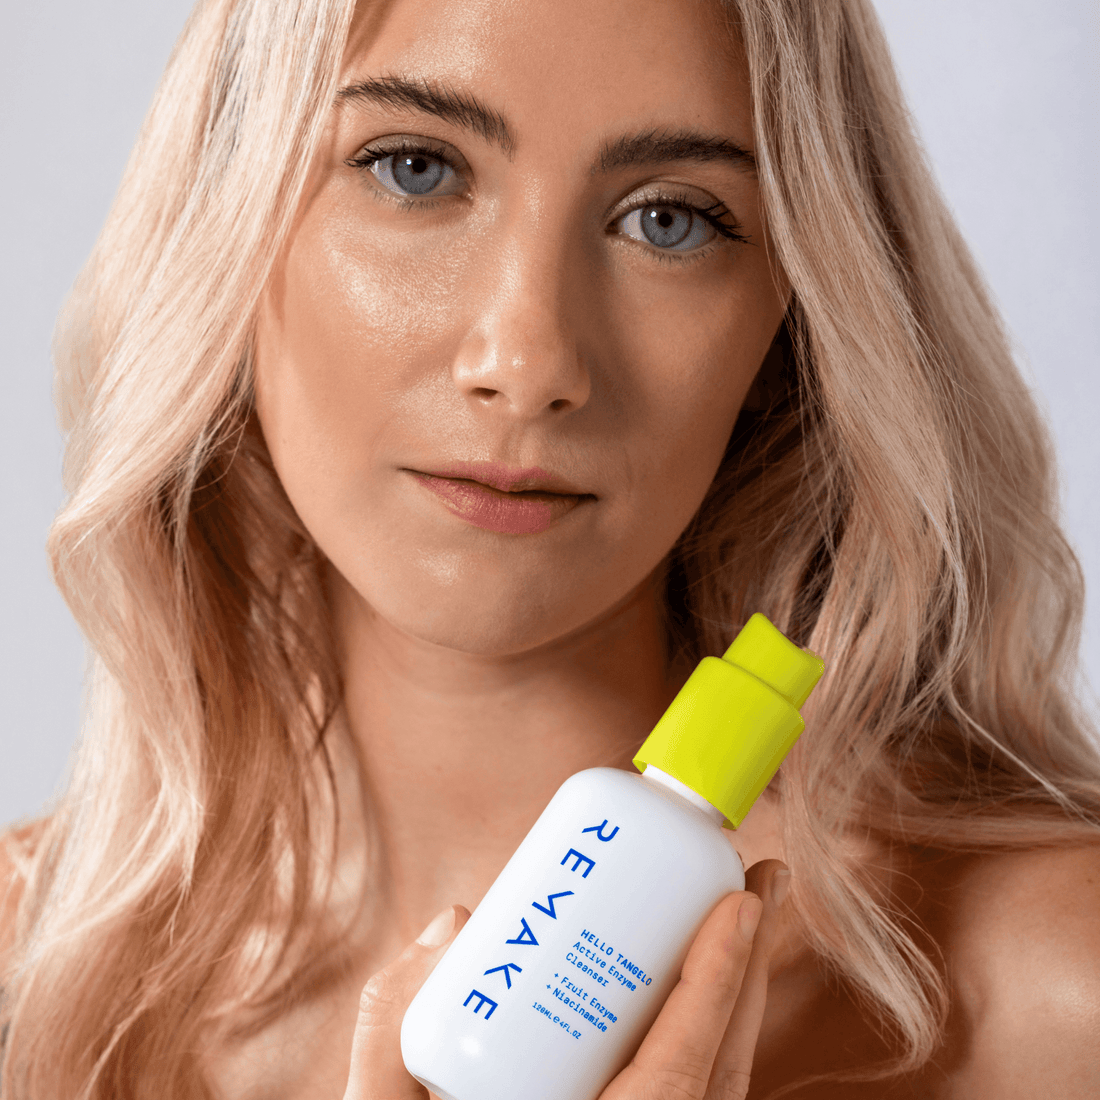 HELLO TANGELO: Active Enzyme Cleanser - REMAKE